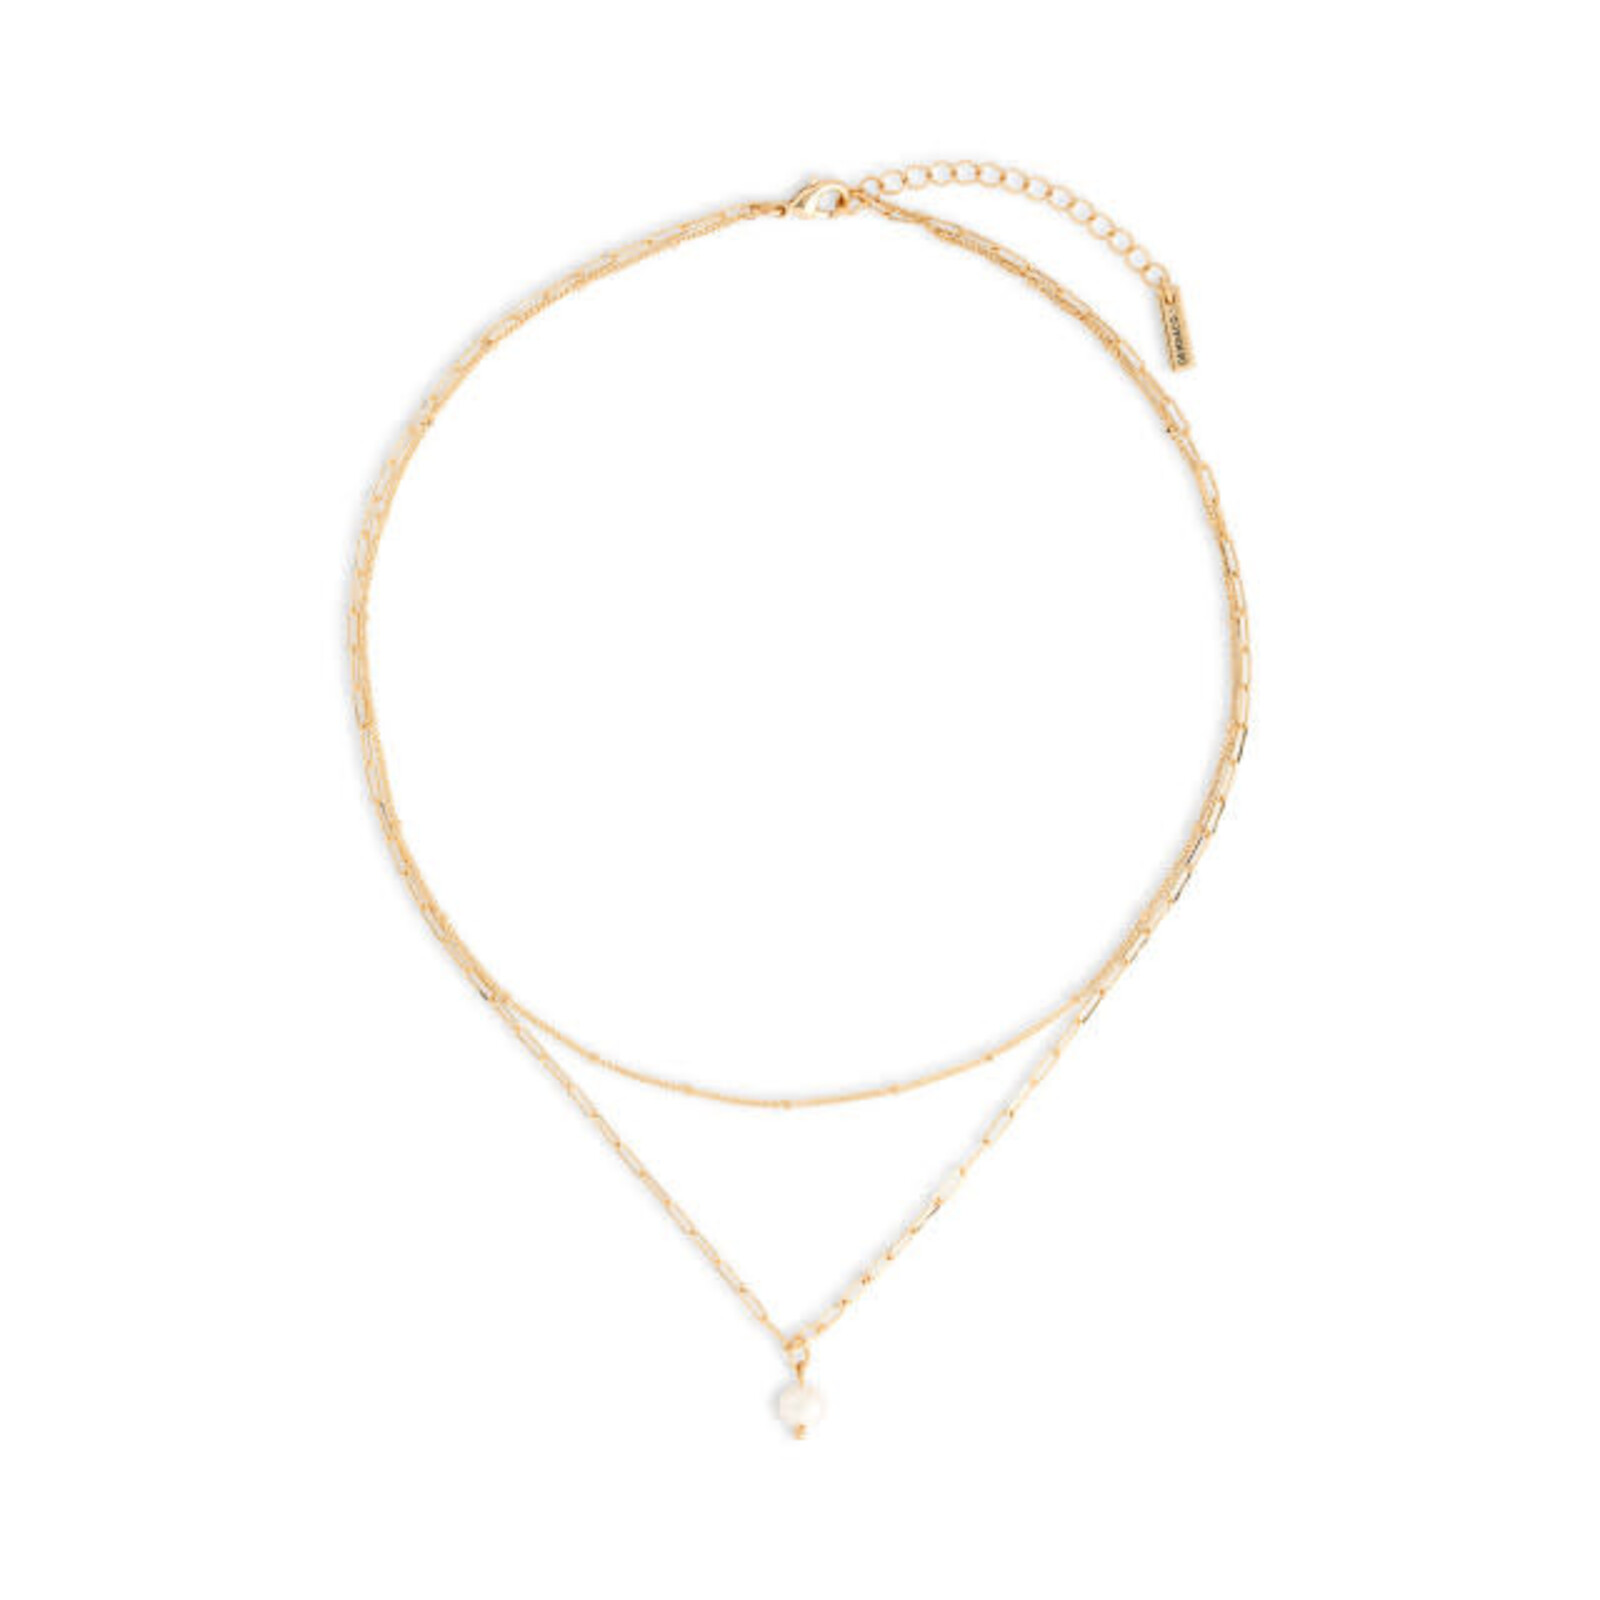 Demdaco Pearls From Within Necklace  - Gold  1004130365 loading=